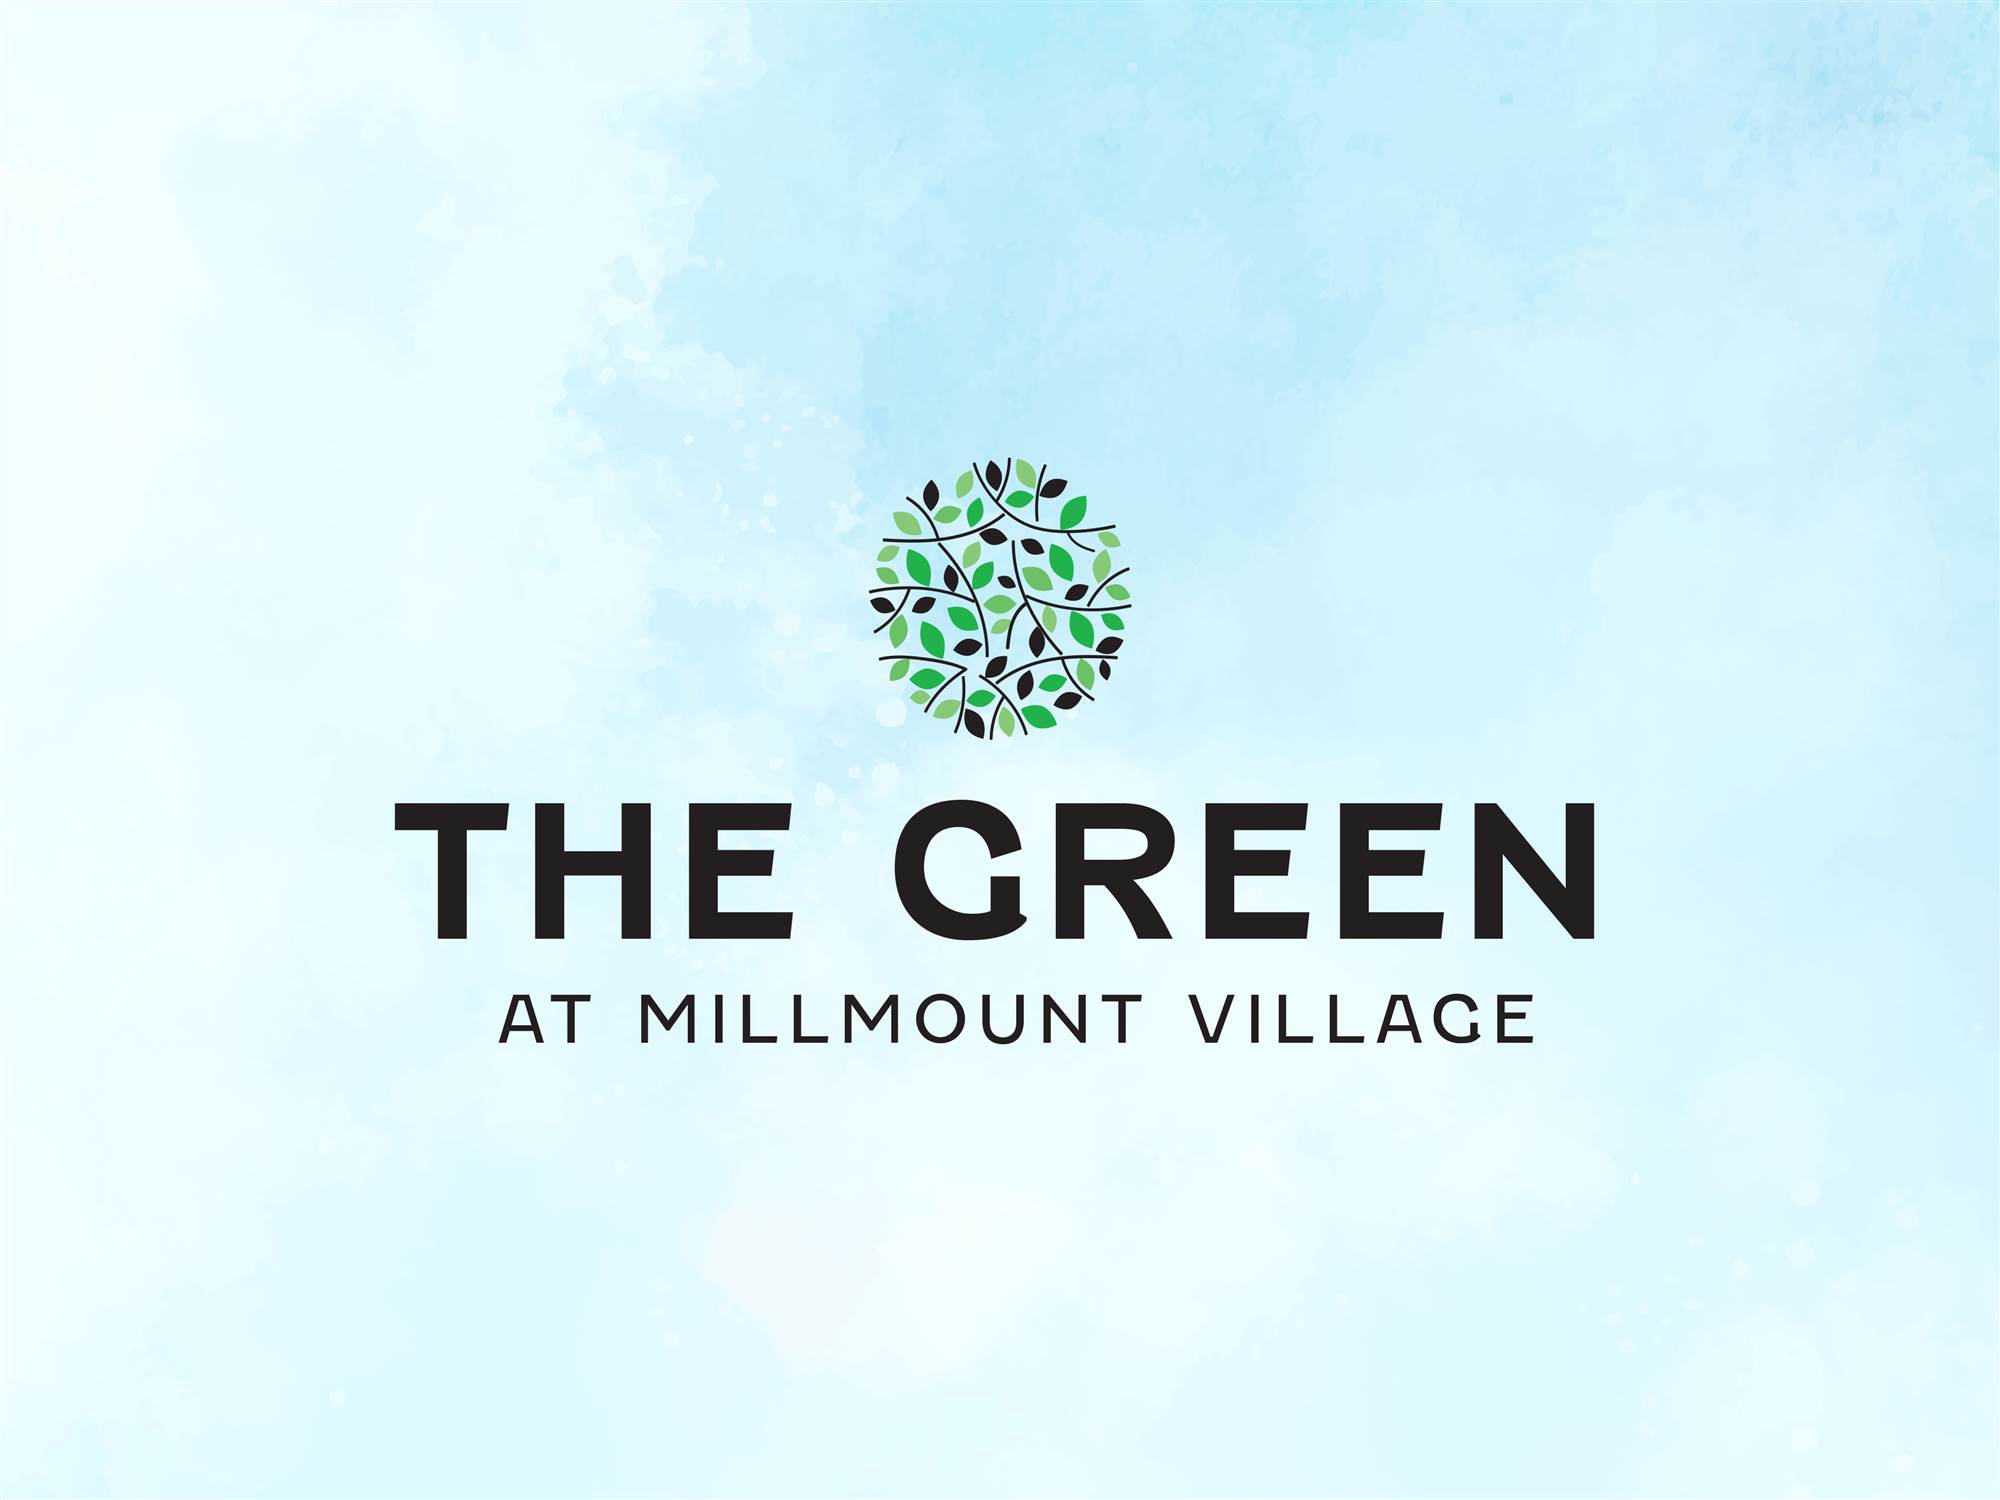 521 The Green at Millmount Village